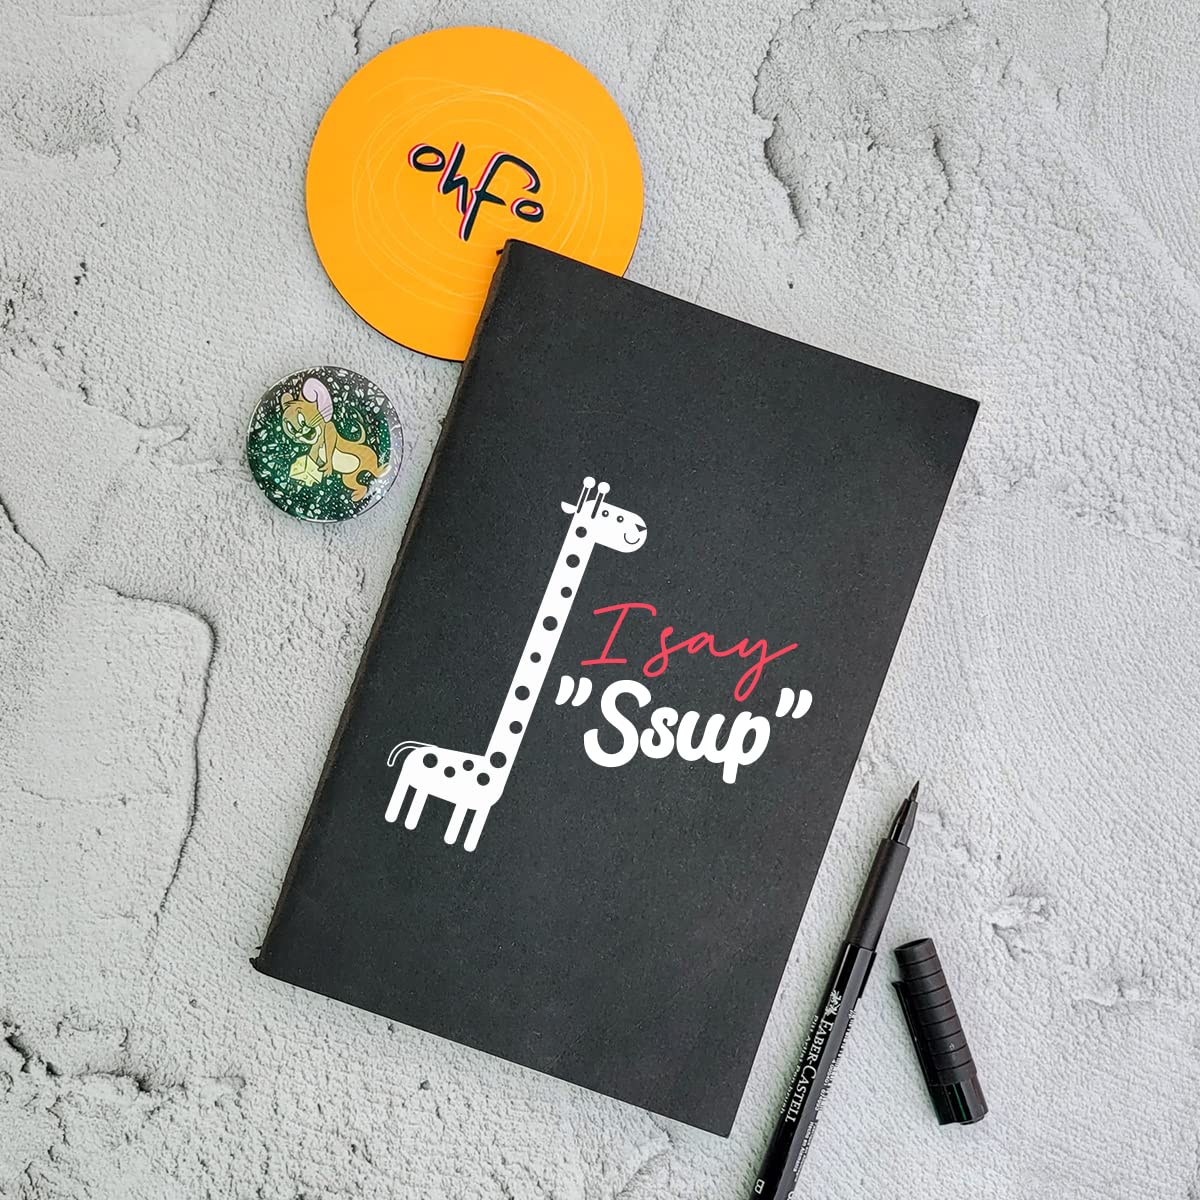 I Say Ssup - Black A5 Doodle Notebook - Kraft Cover Notebook - A5 - 300 GSM Kraft Cover - Handmade - Unruled - 80 Pages - Natural Shade Pages 120 GSM - Funny Quotes & Quirky, Funky designs